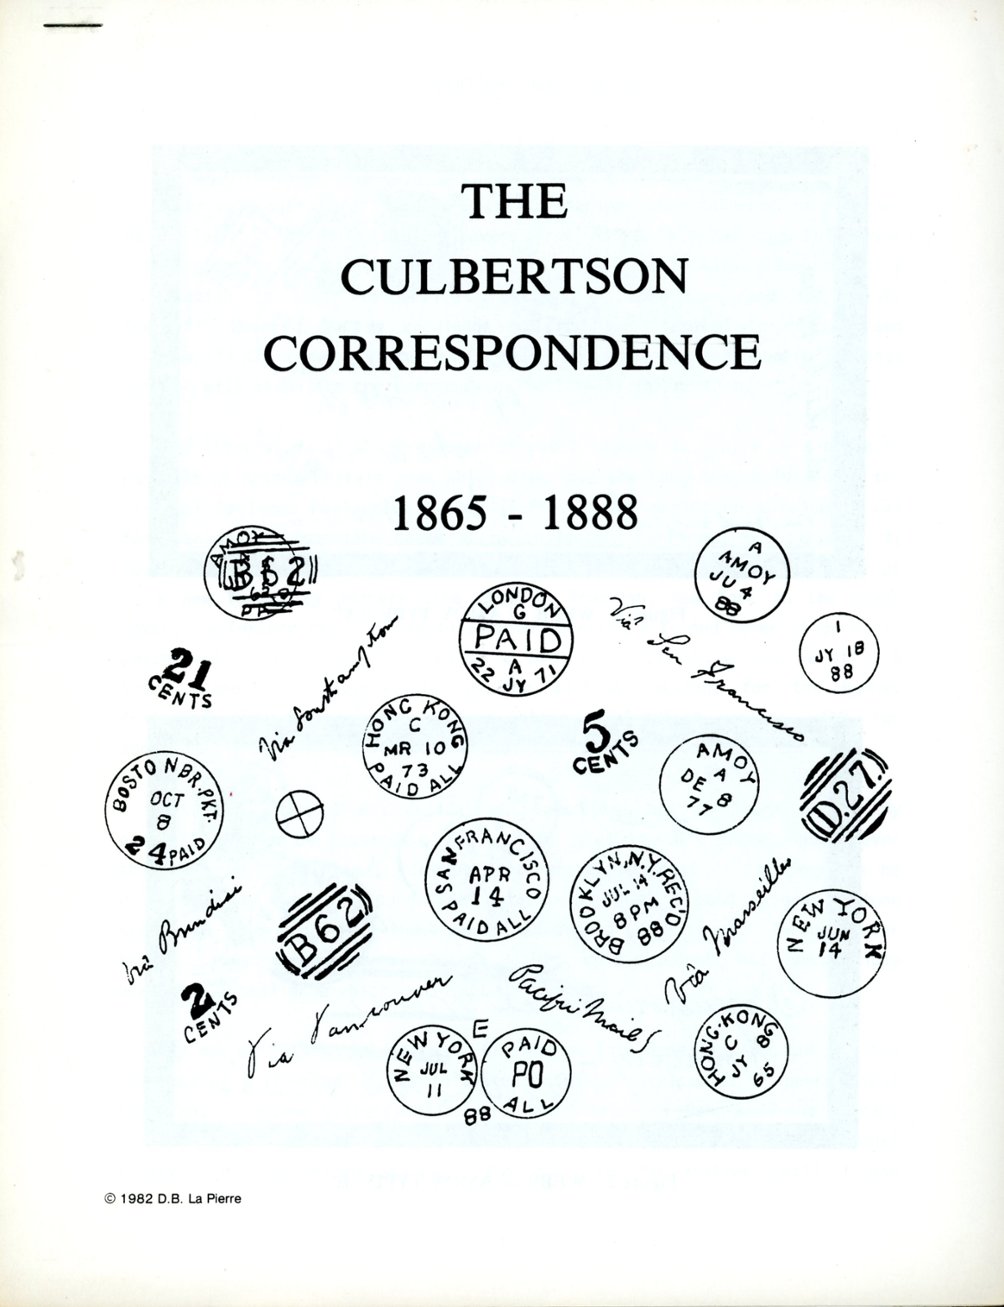 The Culbertson Correspondence 1865-1888, stapled photocopy of monograph, in very good condition (4 oz)